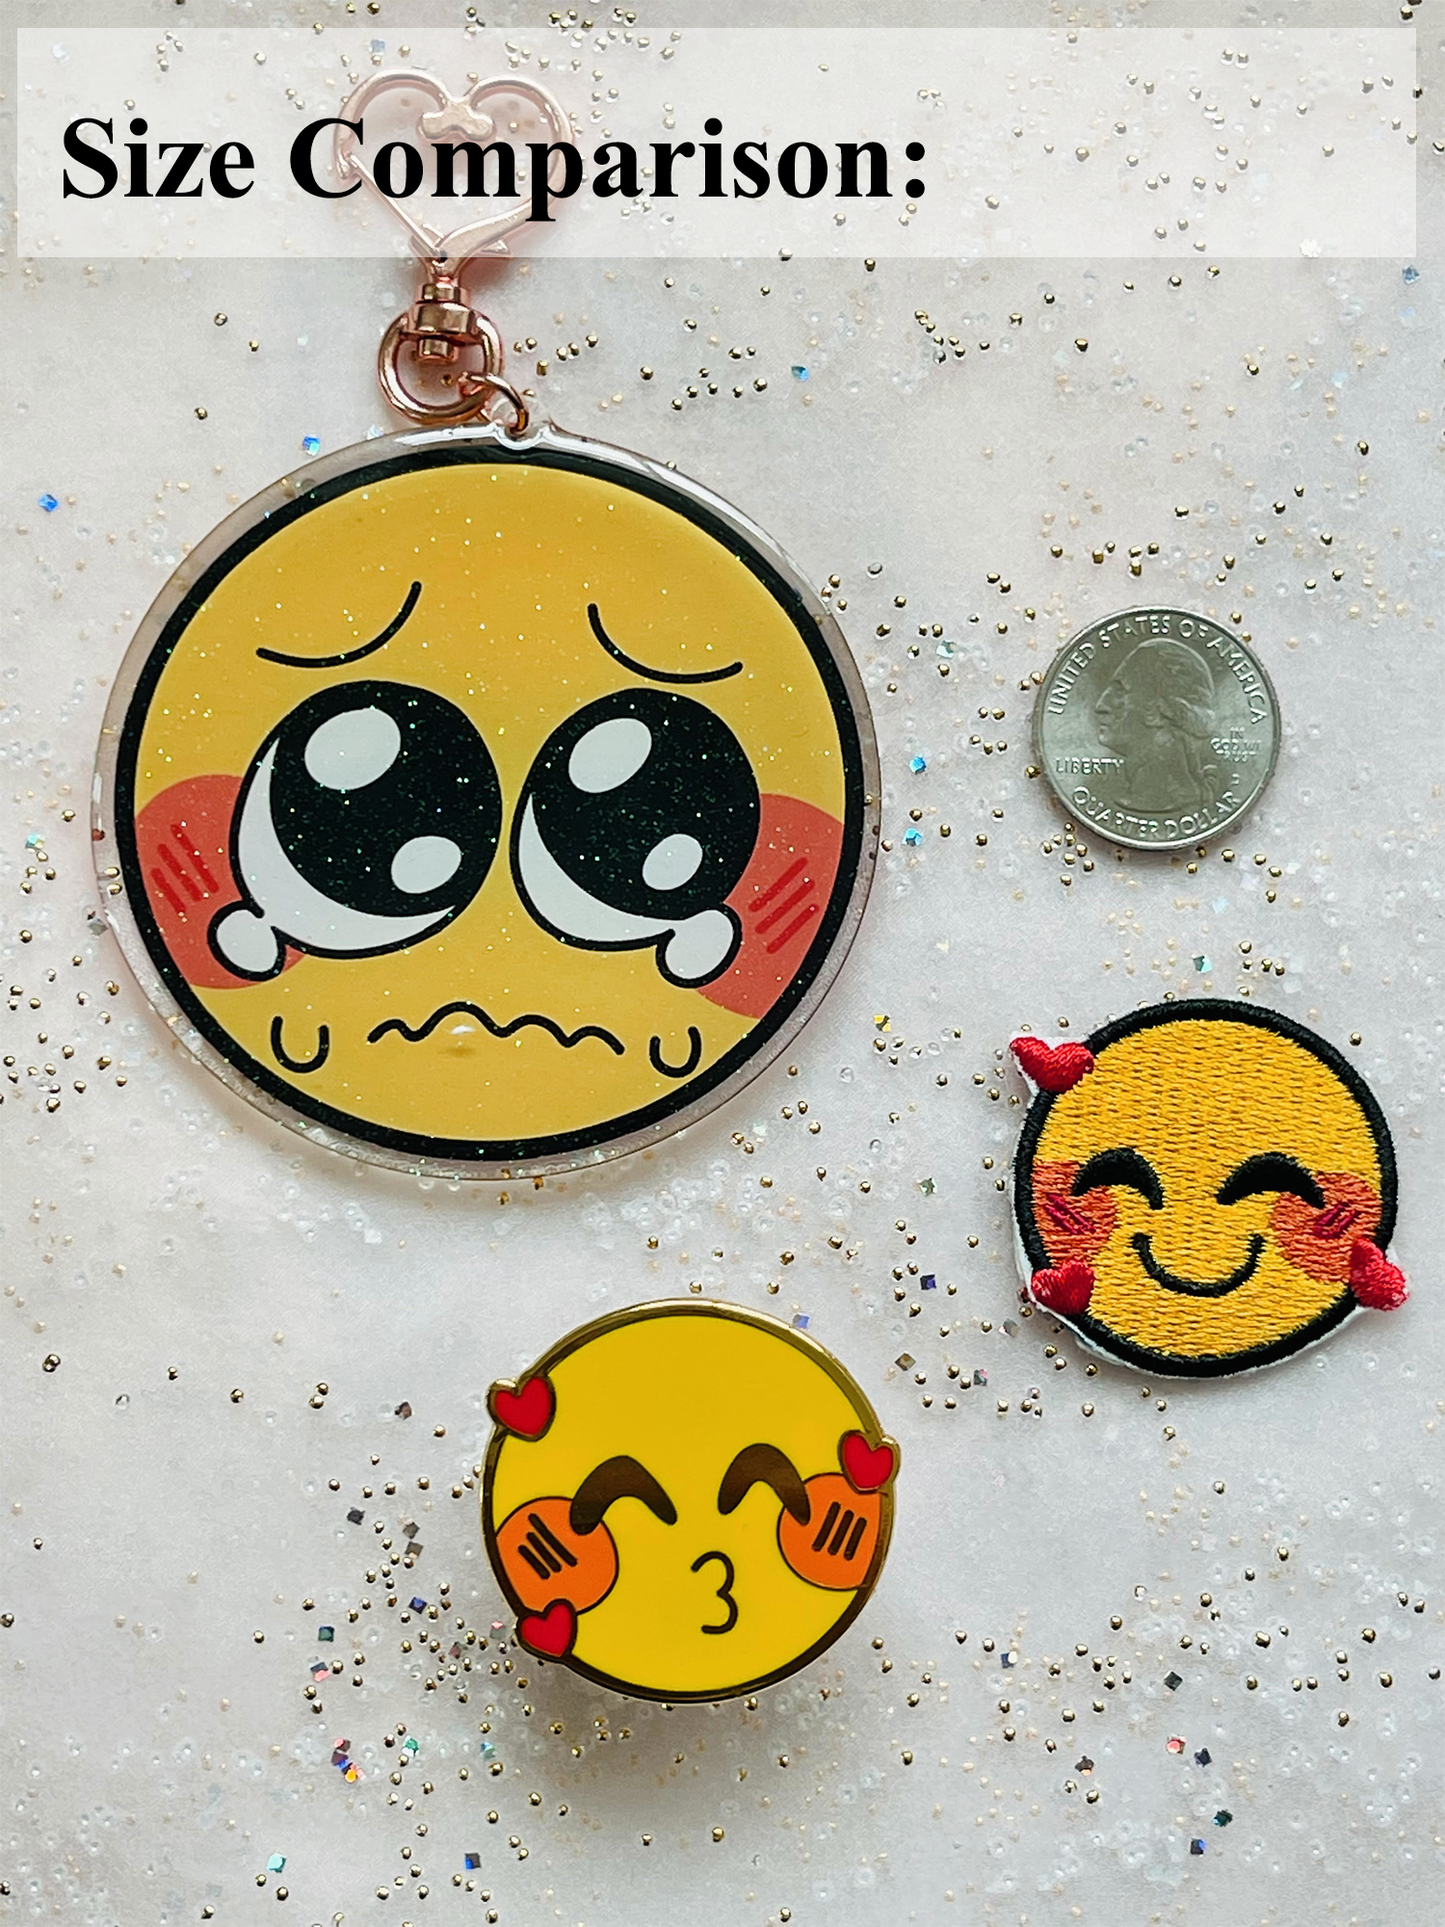 An acrylic charm, pin, and patch shown next to a quarter as a size comparison. The pin and patch are the same size, and are 1.5 times the size of the quarter. The acrylic charm is double the size of the pin and patch, and three times the size of the quarter.